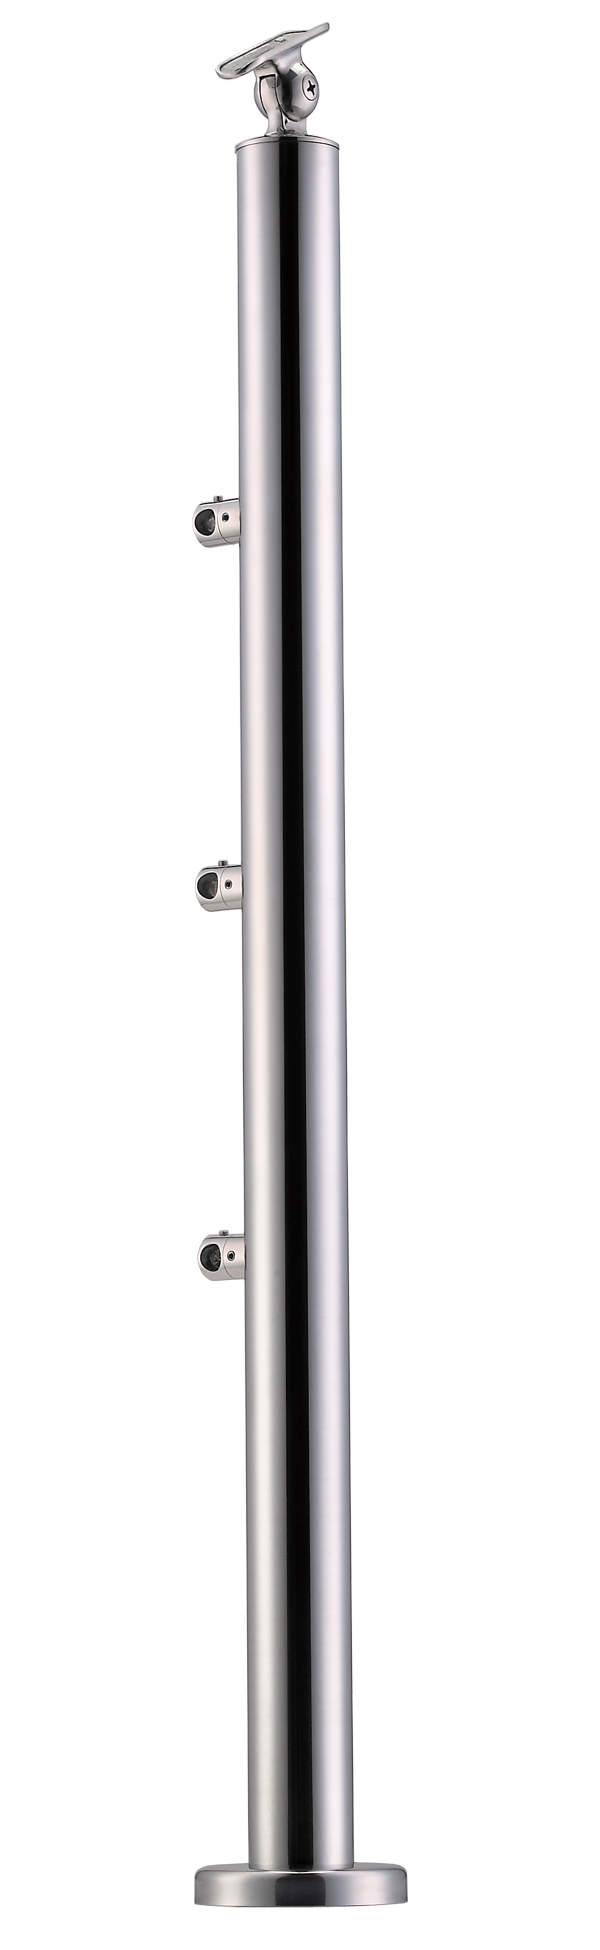 Stainless Steel Balustrade Posts - Tubular - SS:2020357A